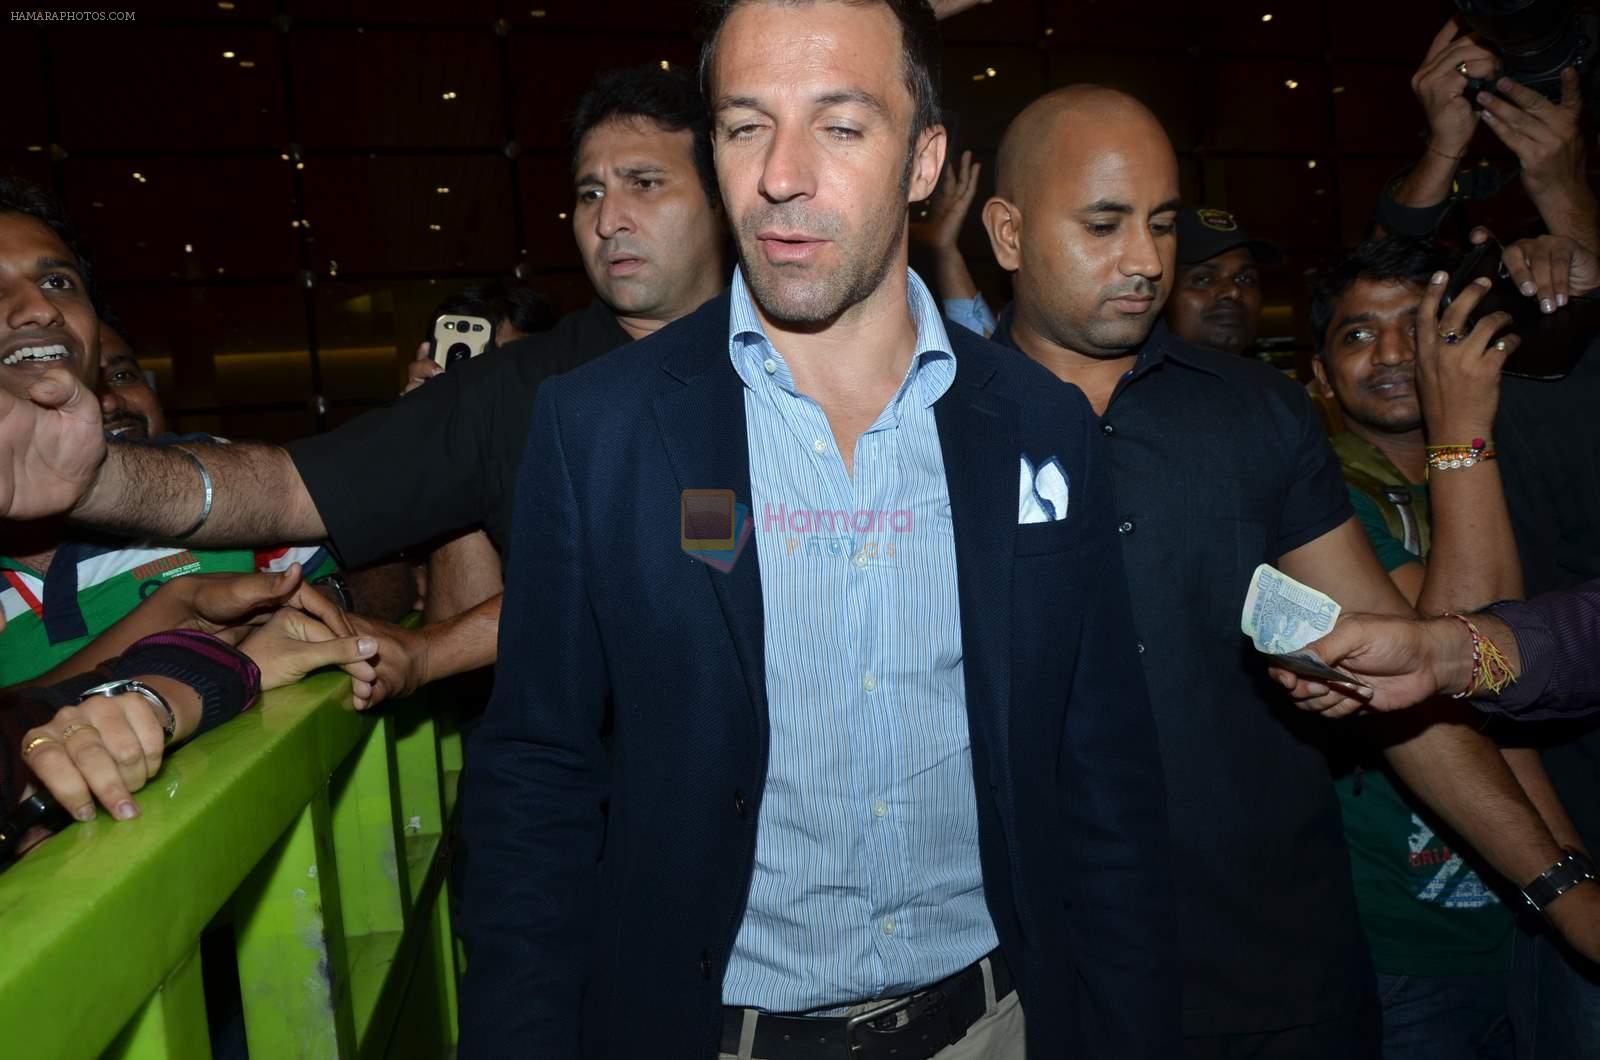 Alessandro Del Piero arrives in India on 30th Aug 2015